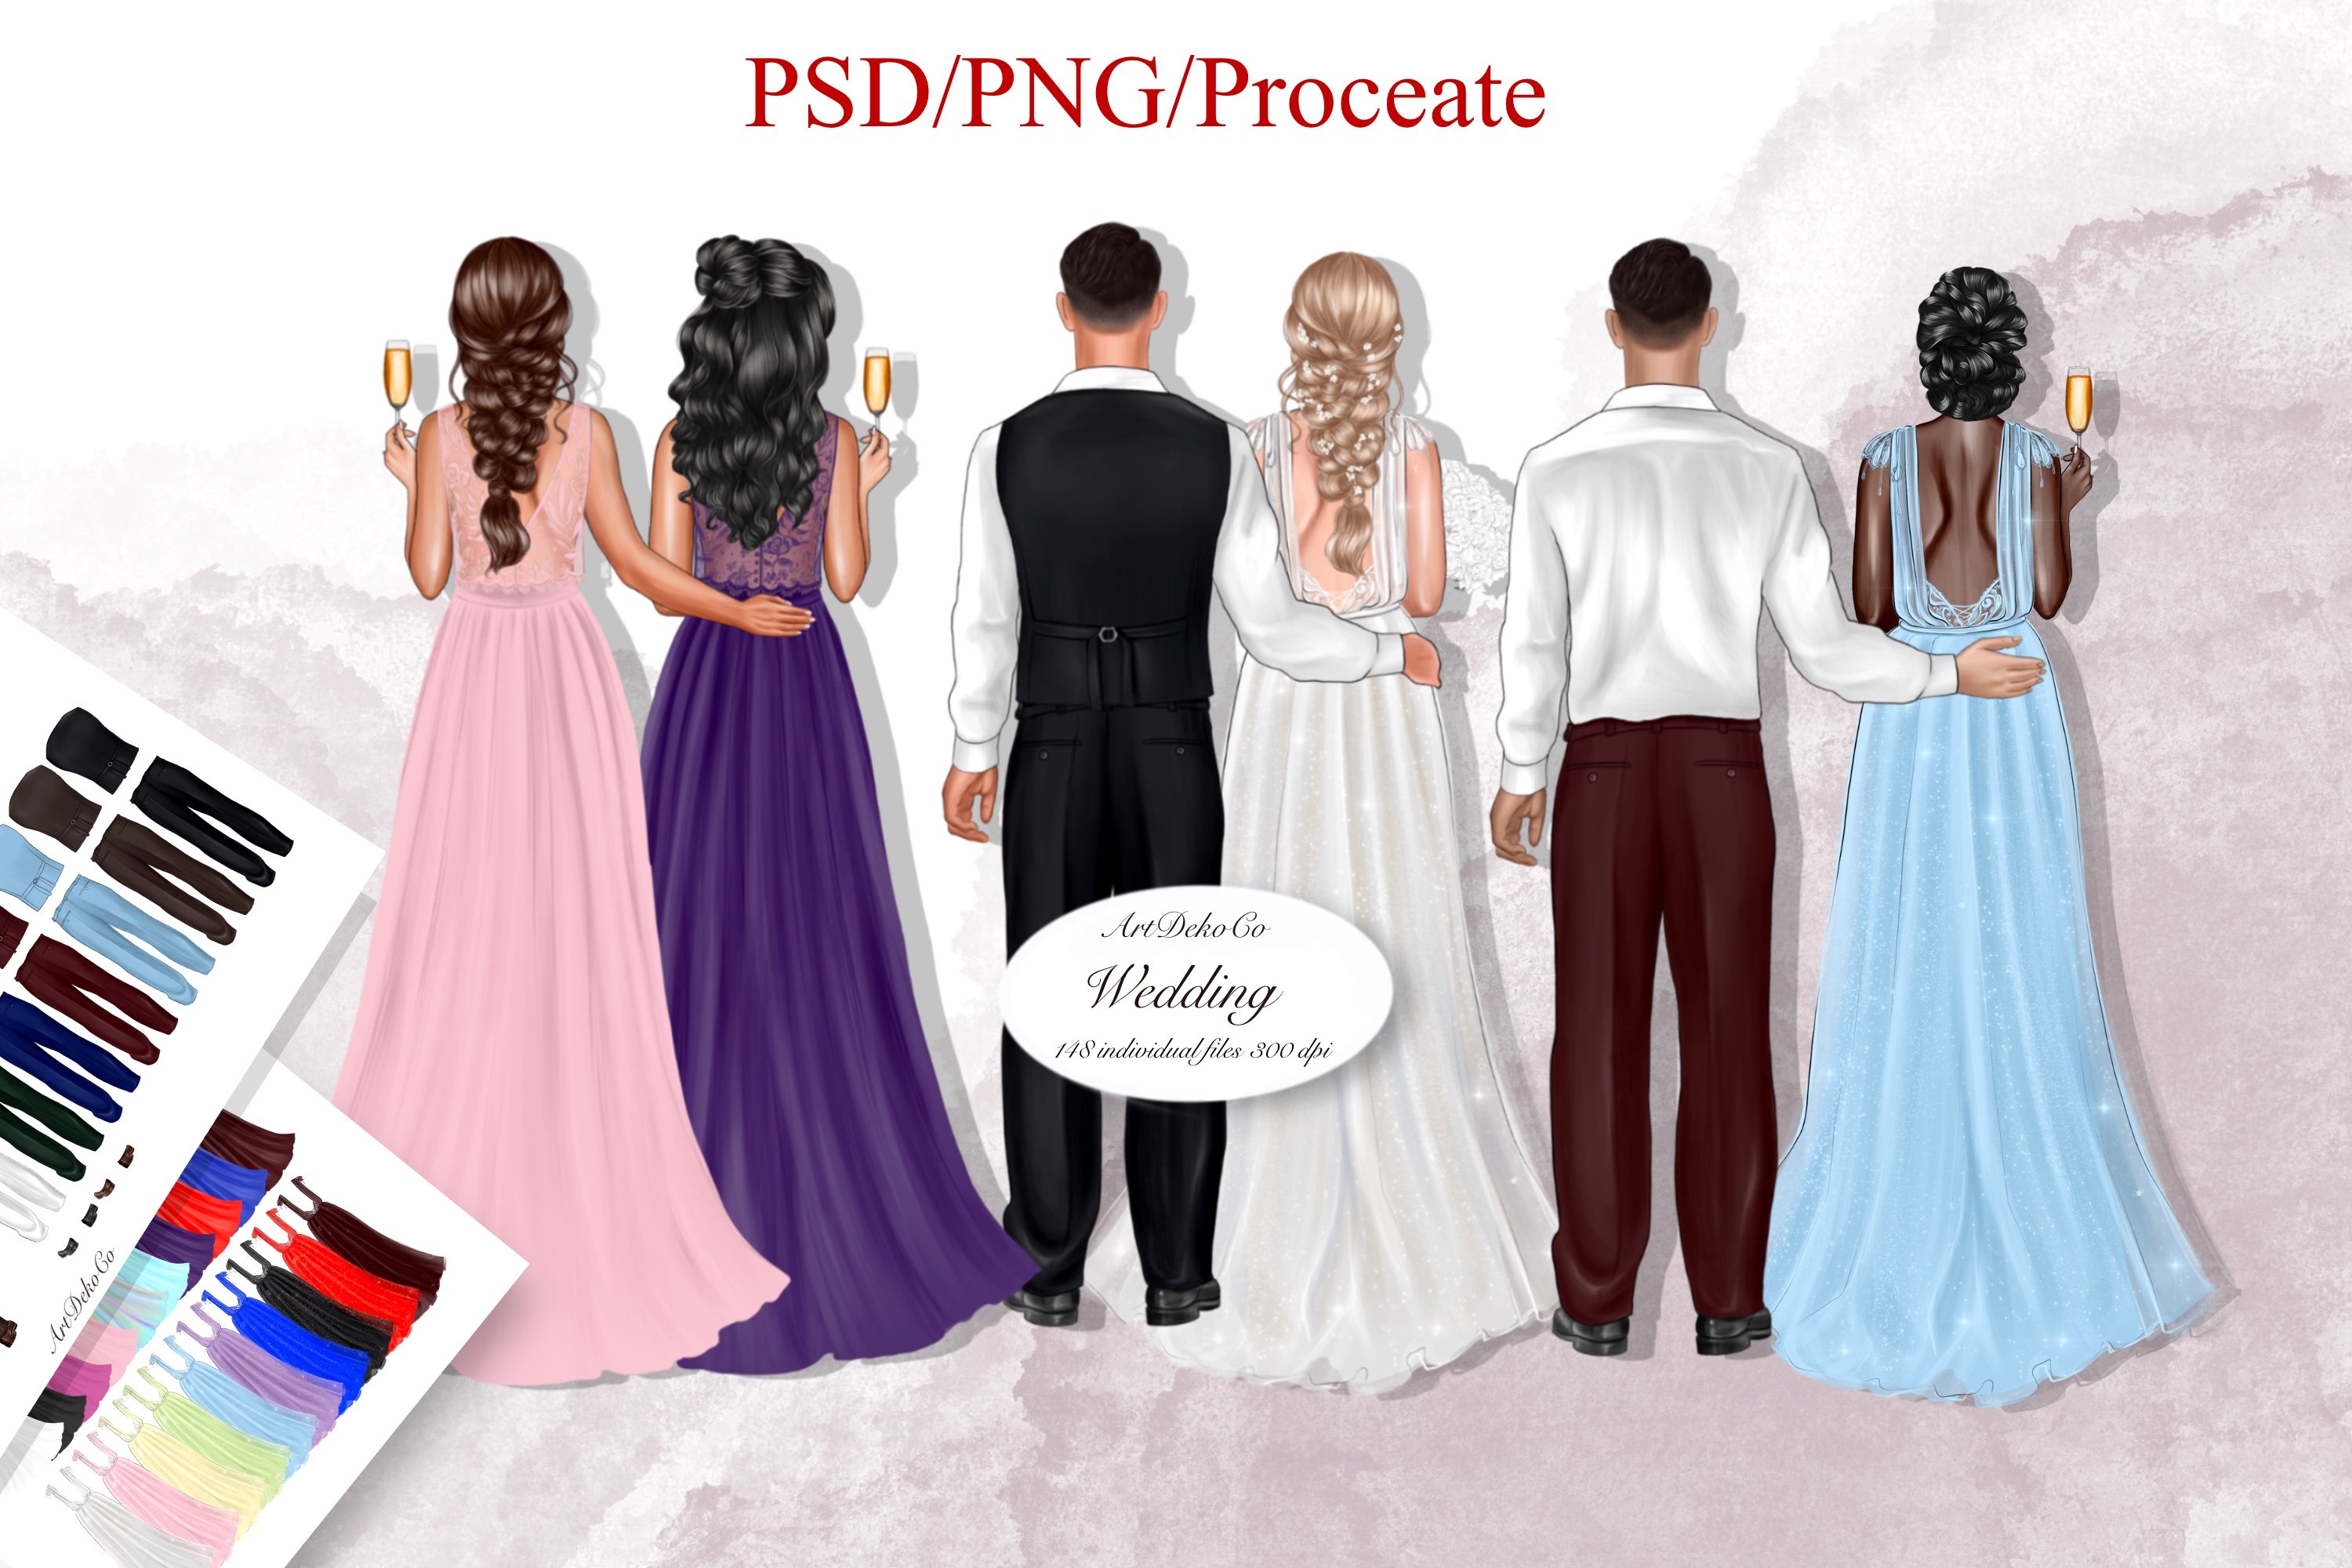 Wedding Day Clipart, Just Married cover image.